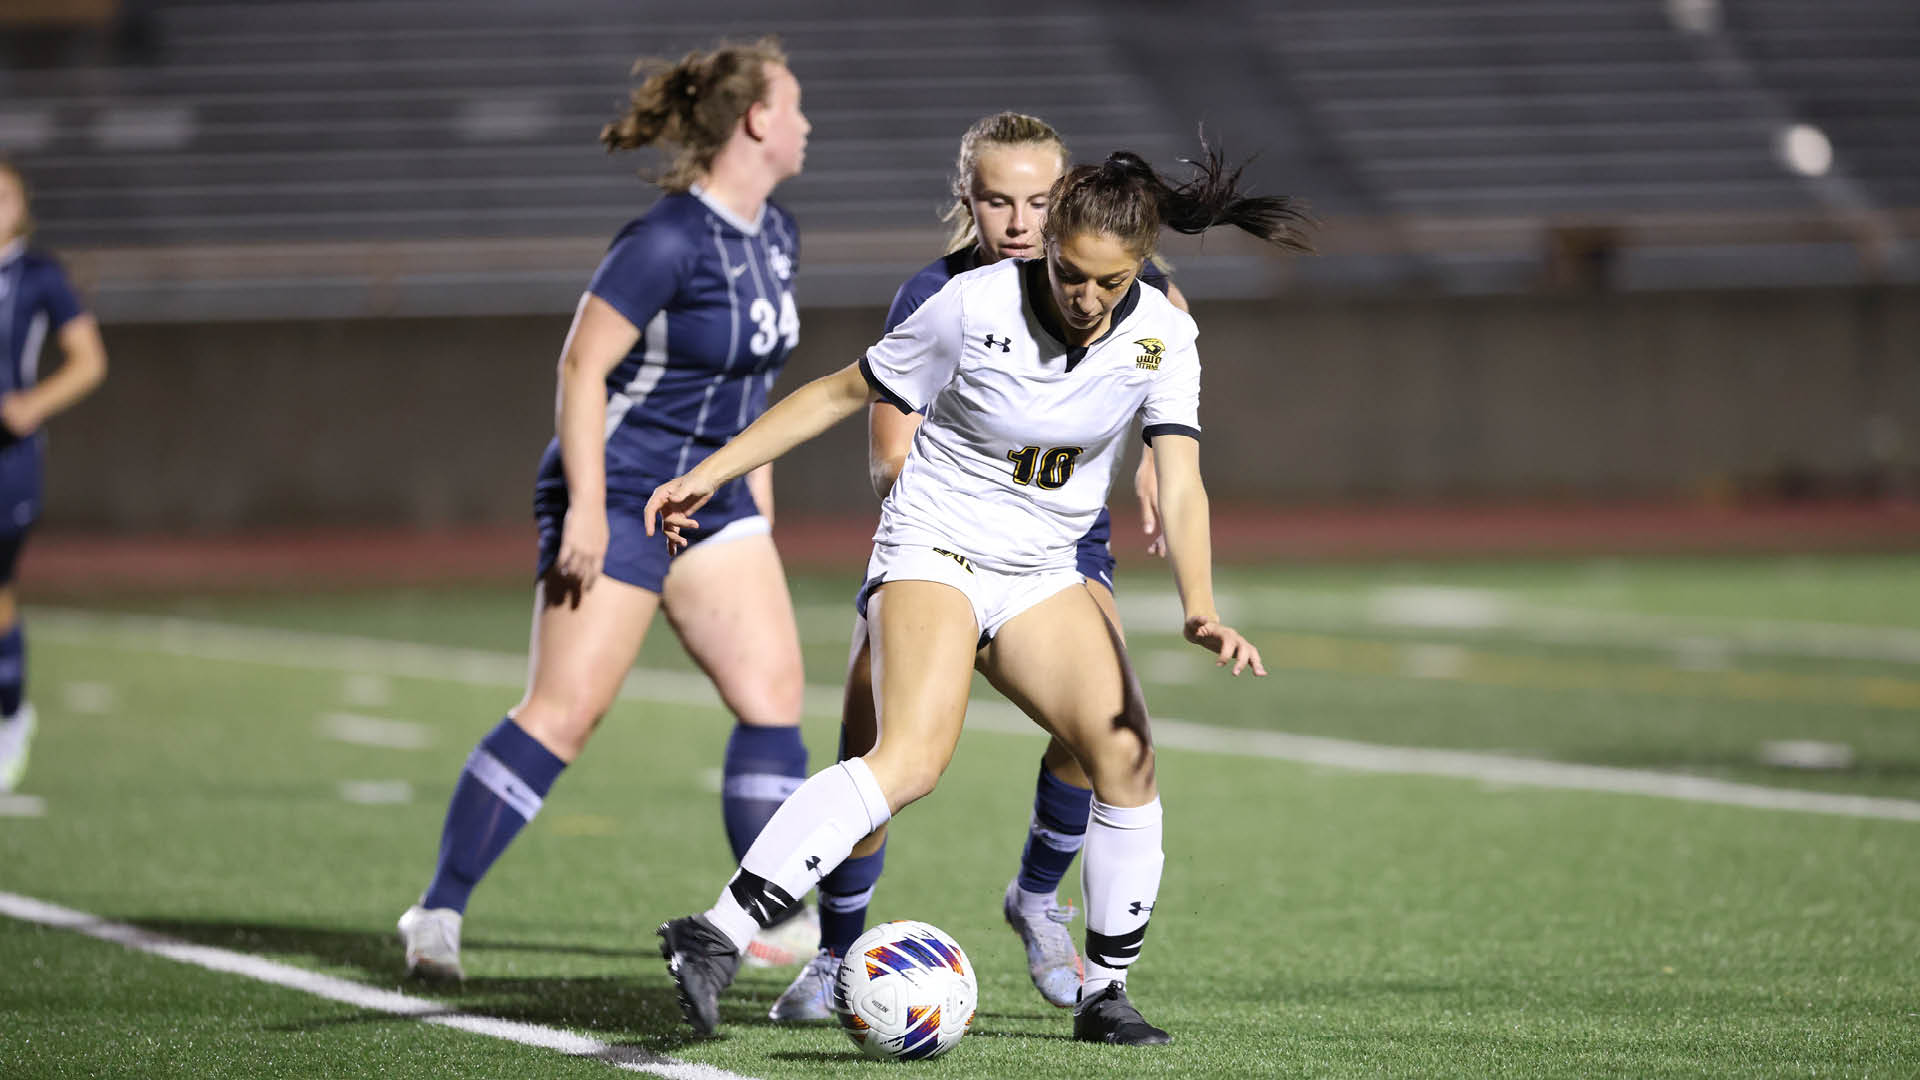 Alexia Poulos recorded an assist during the game against Stout. Poulos is picutred against Lawrence University